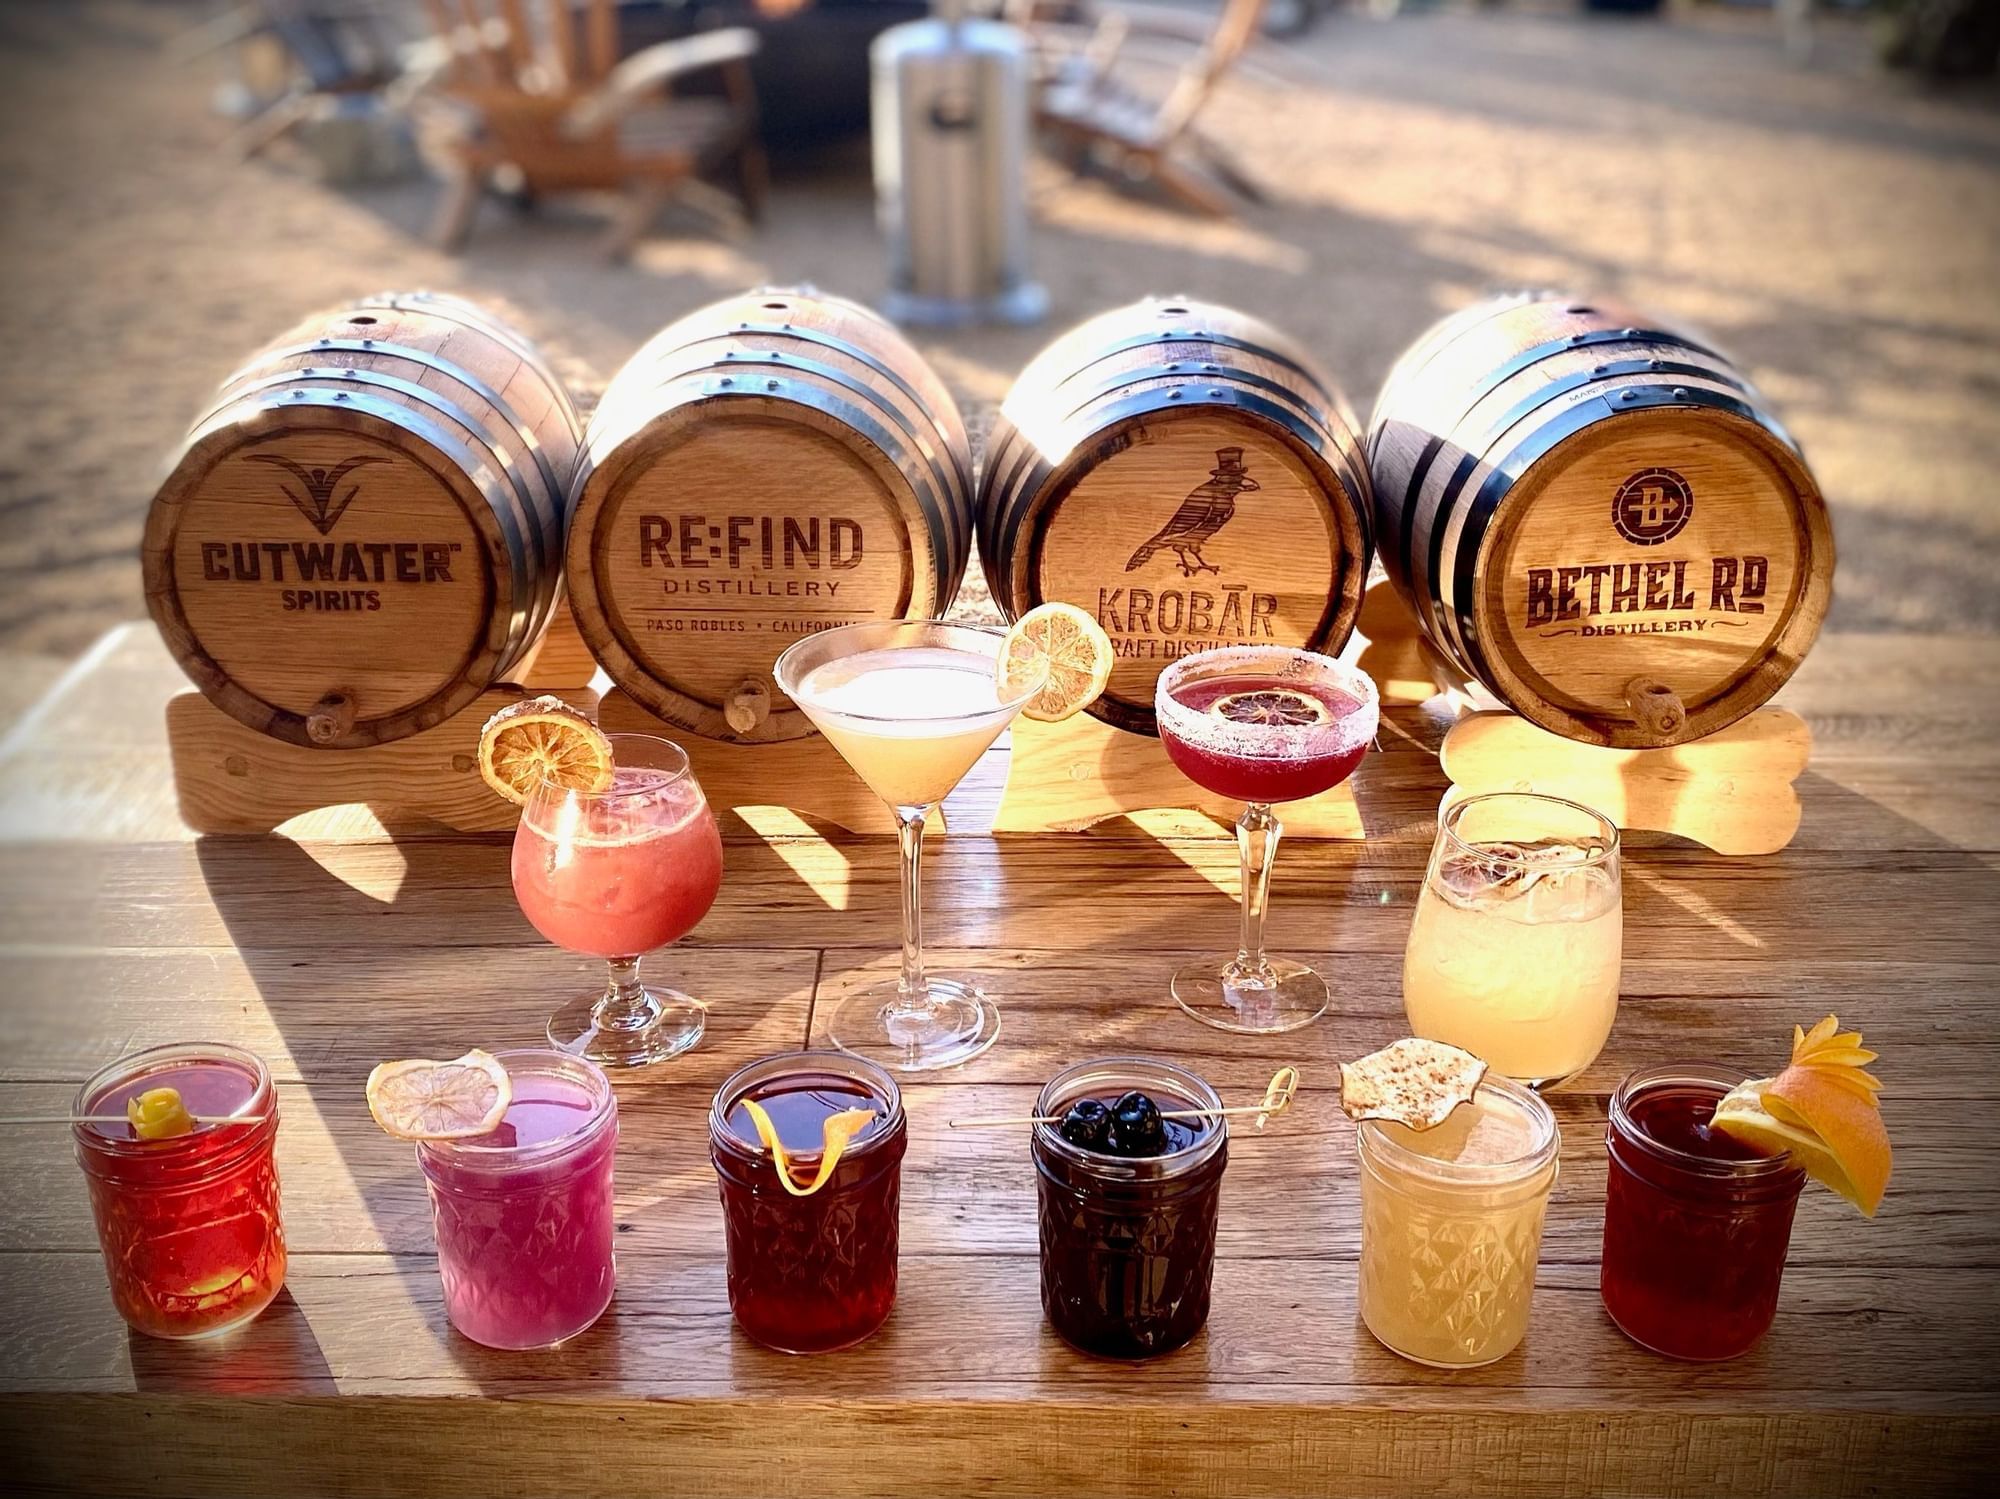 A line of handcrafted cocktails in front of barrels